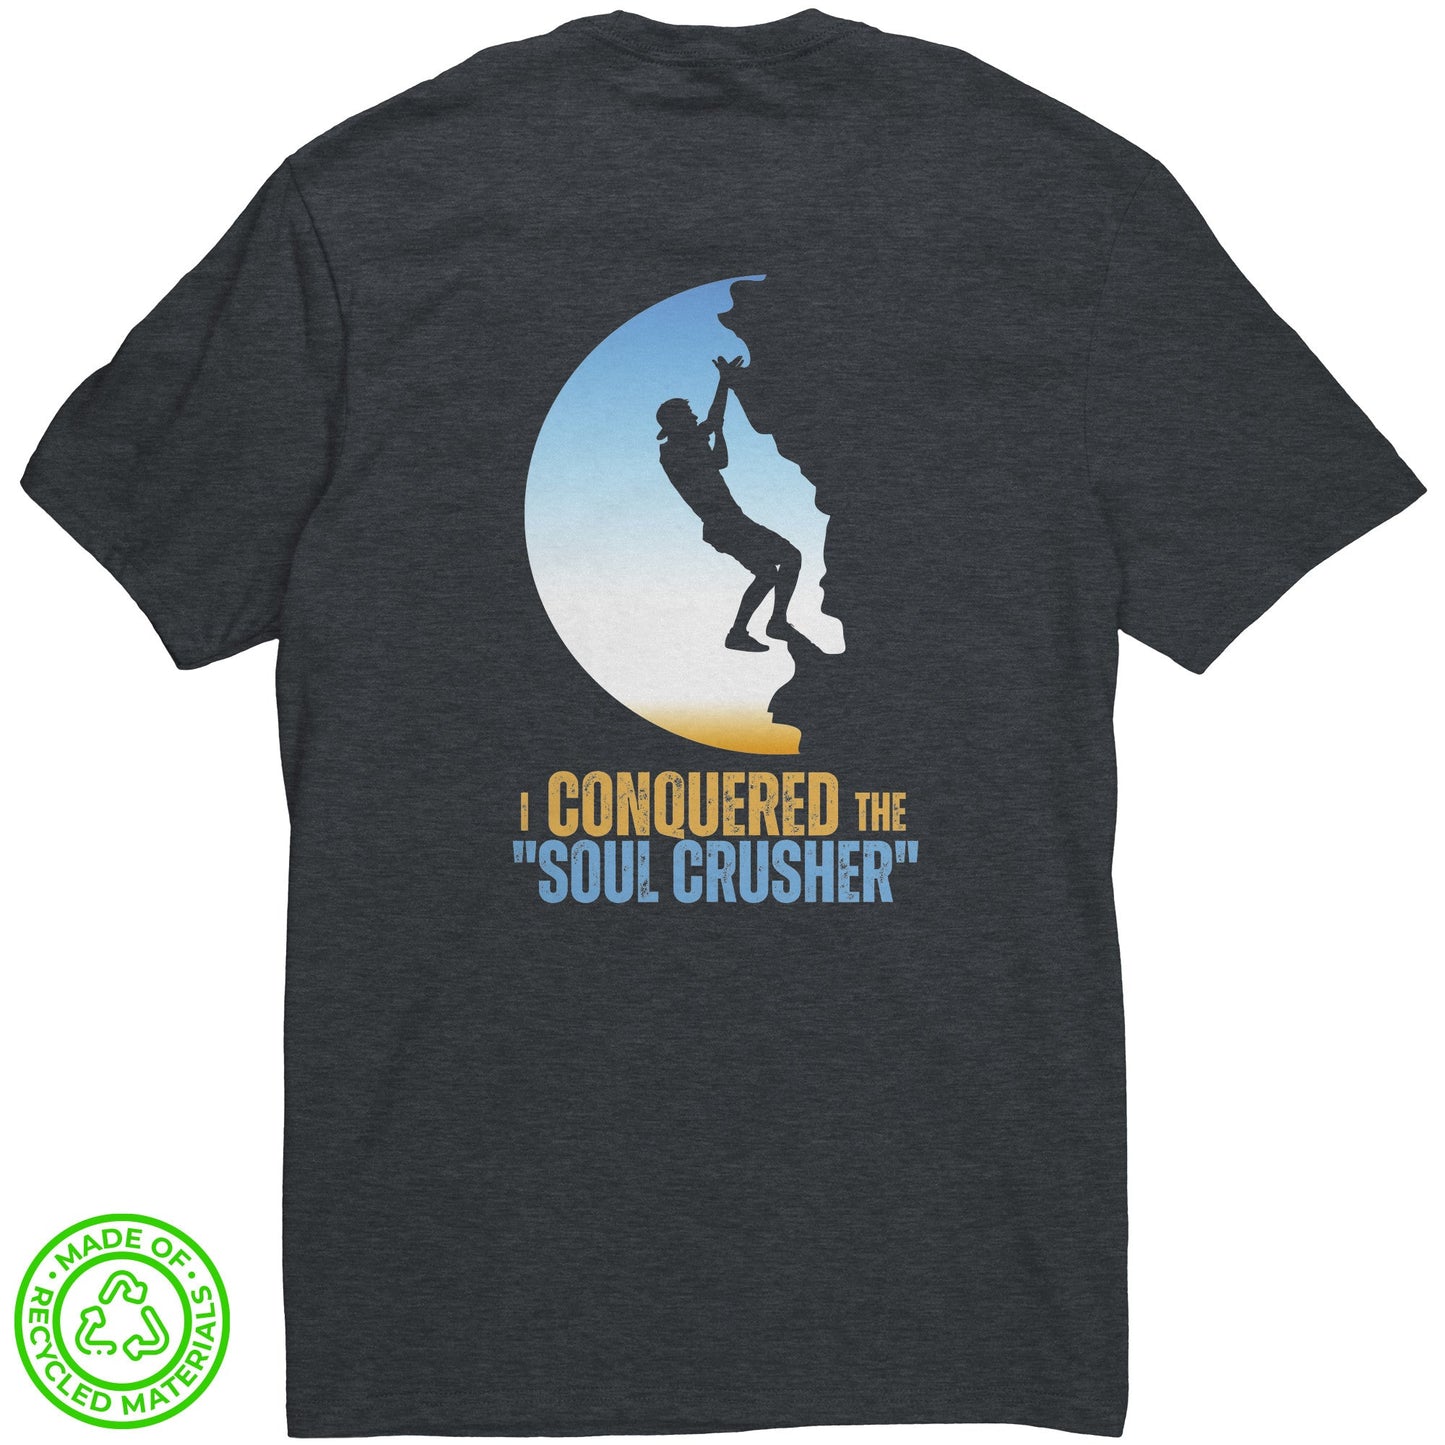 Eco-Friendly Re-Tee (I conquered the Soul Crusher)